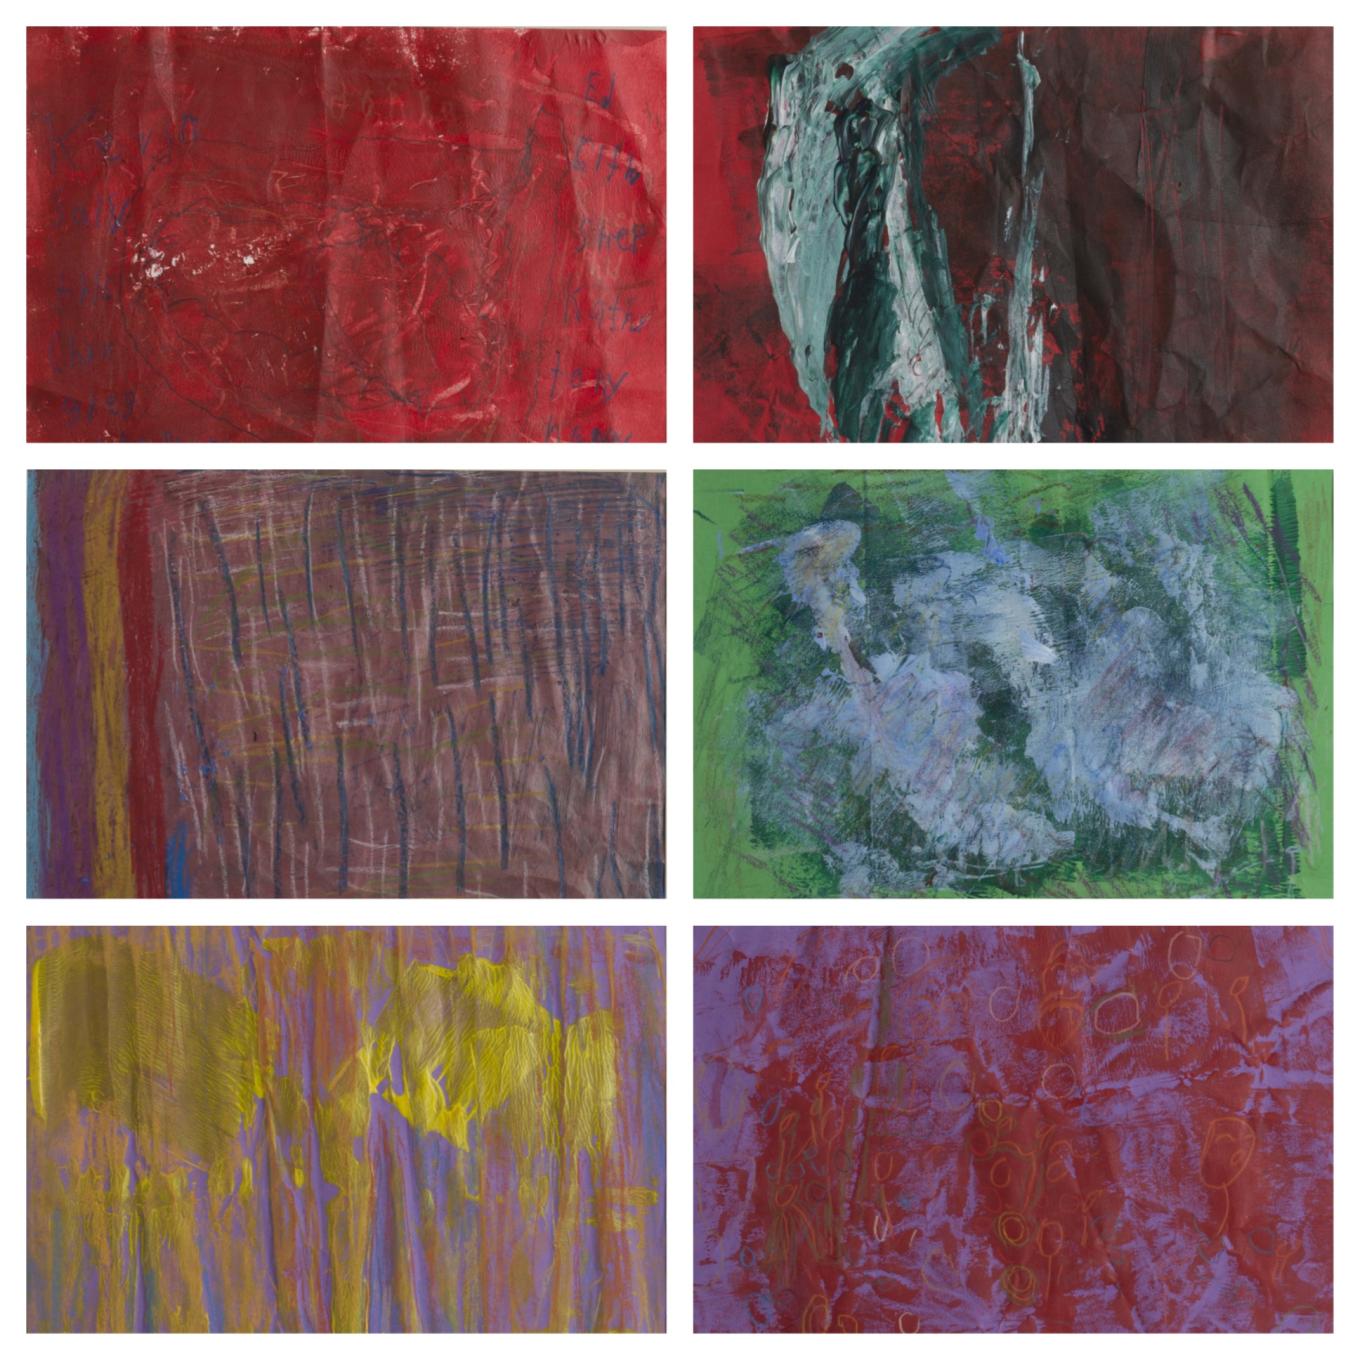 (Top left) Patricia Abell, Family, 2014. Acrylic paint and oil pastel on construction paper. (Top right) Isom "Ike" Hunter, Untitled, 2014. Acrylic paint on construction paper. (Middle left) Mildered Howard, The Perfect Paint, 2014. Acrylic paint and oil pastel on construction paper. (Middle right) Alexander Tscherny, Untitled, 2014. Acrylic paint and oil pastel on construction paper. (Bottom left) Susan Morgan, Eye Opener, 2014. Acrylic paint and chalk pastel on construction paper. (Bottom righ